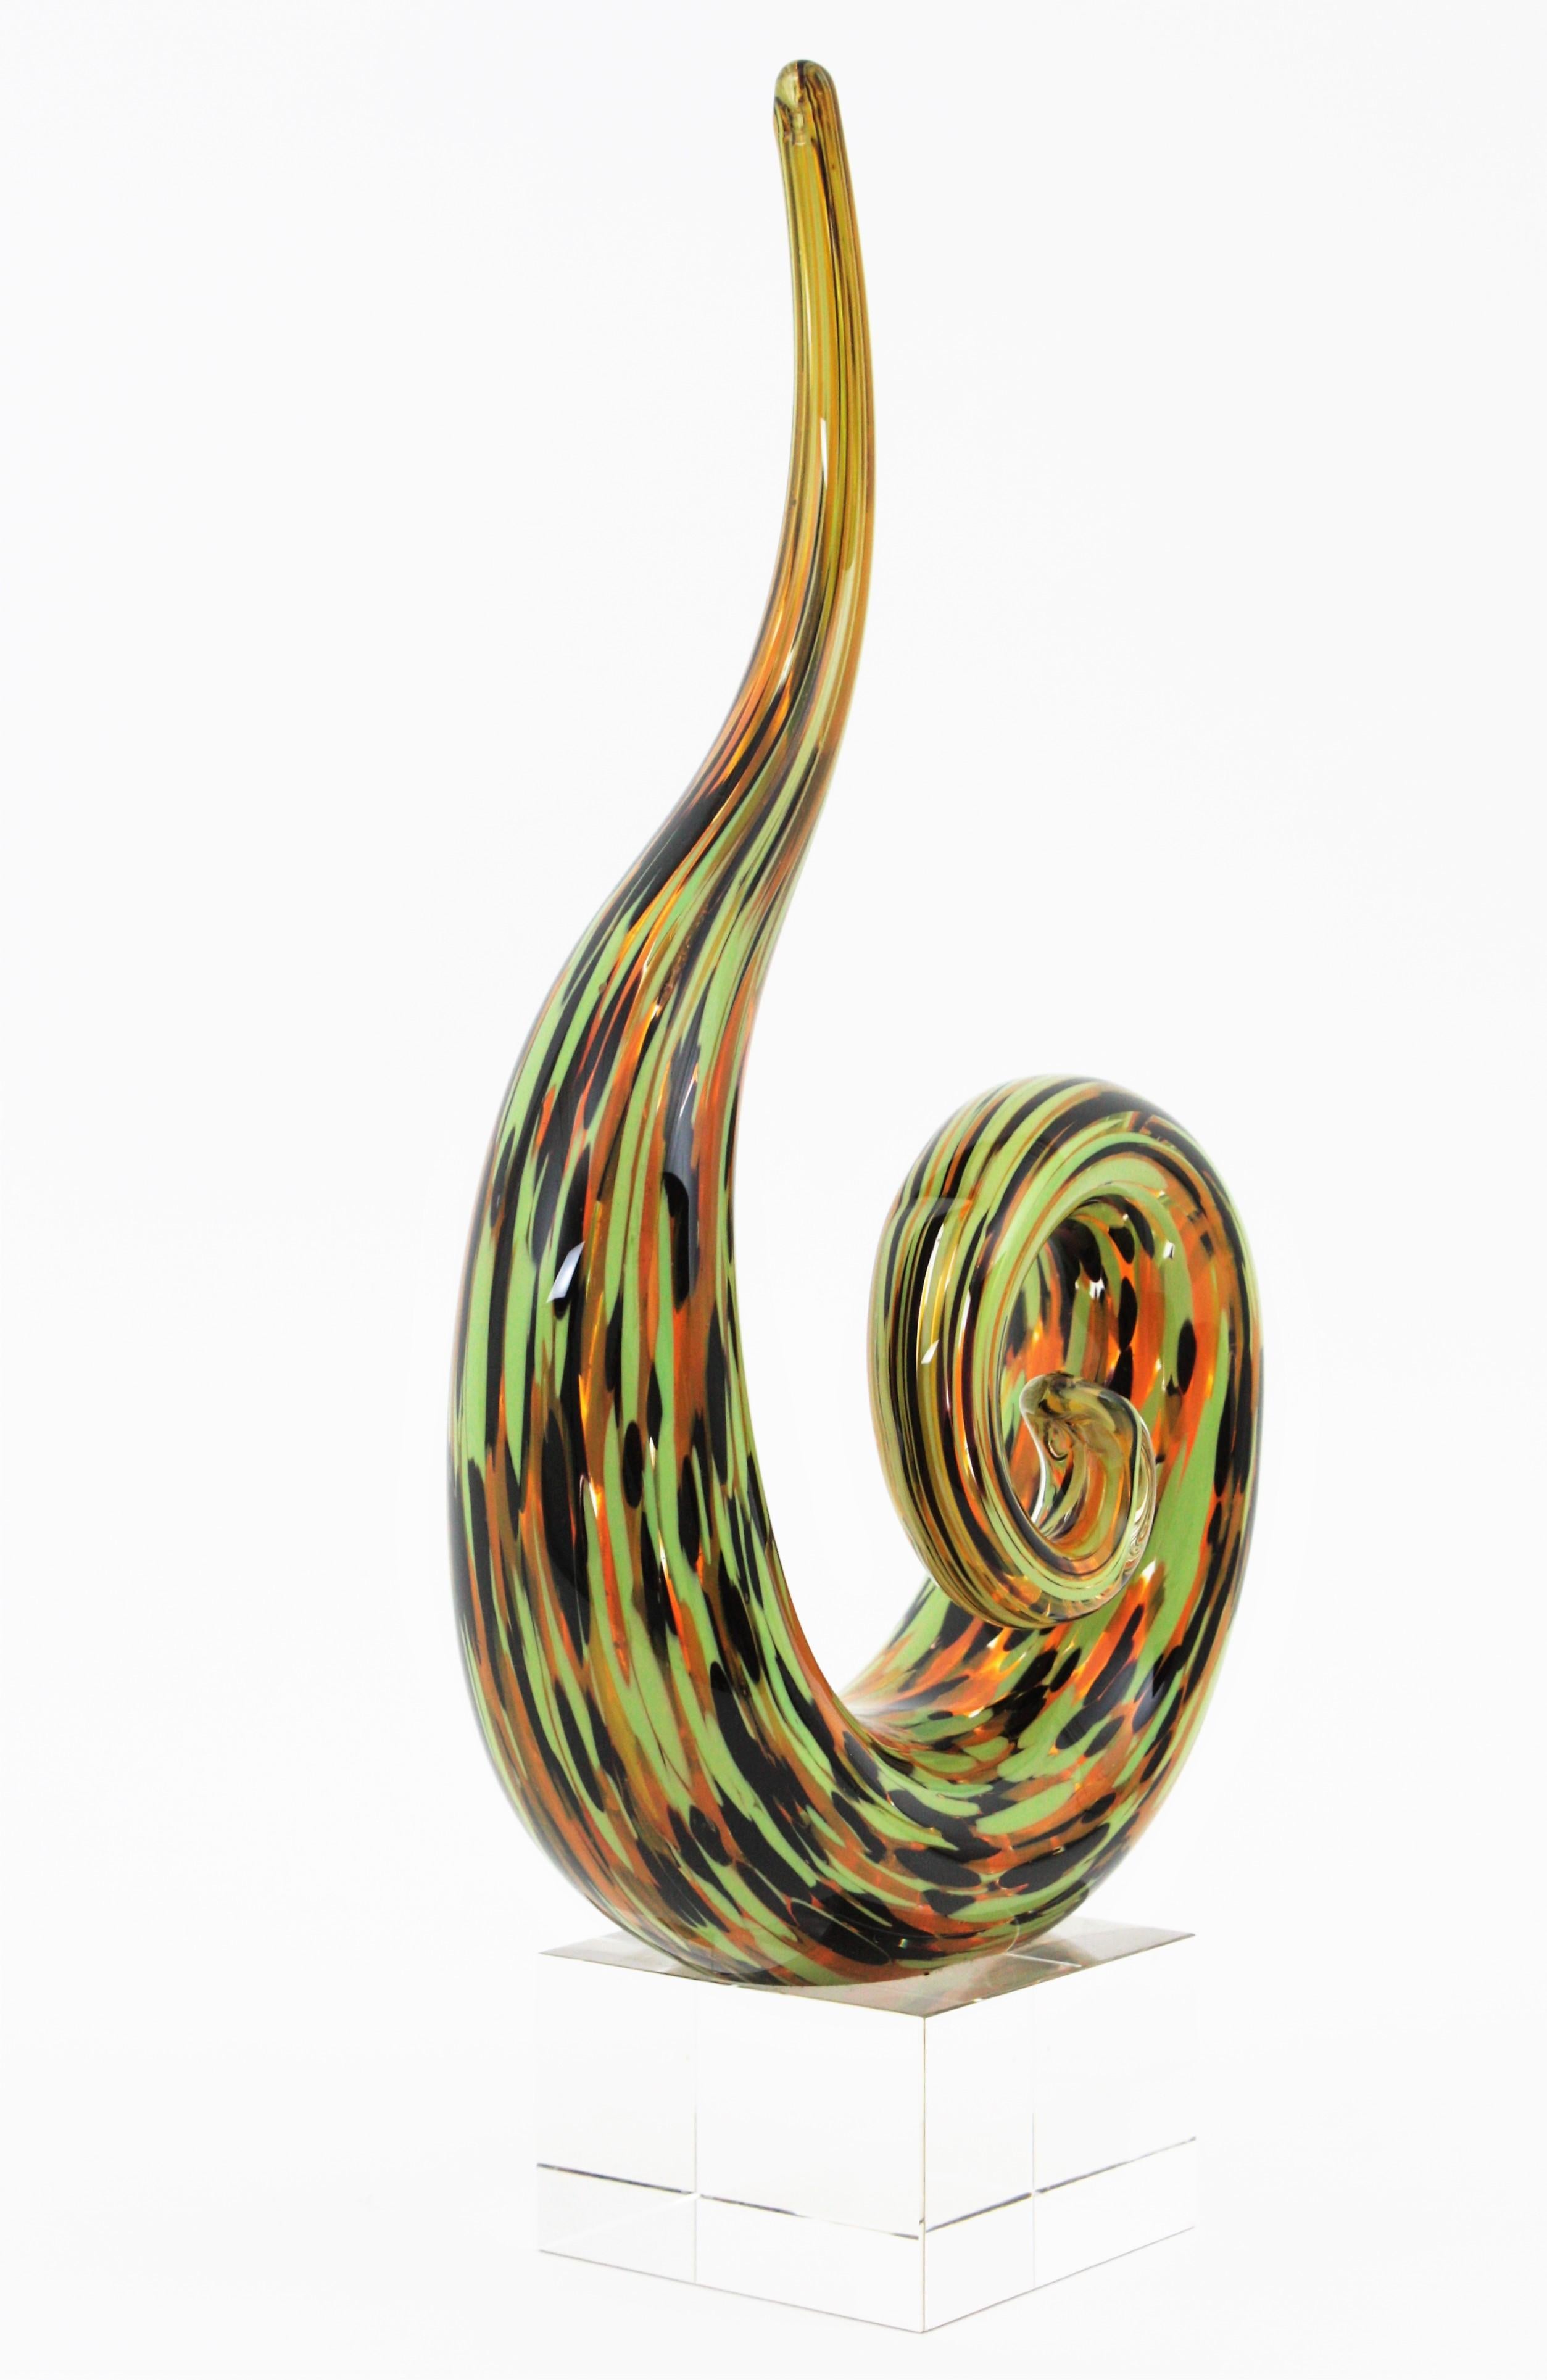 Hand-Crafted Murano Art Glass Multi Color Spiral Paperweight Sculpture, Italy, 1960s For Sale